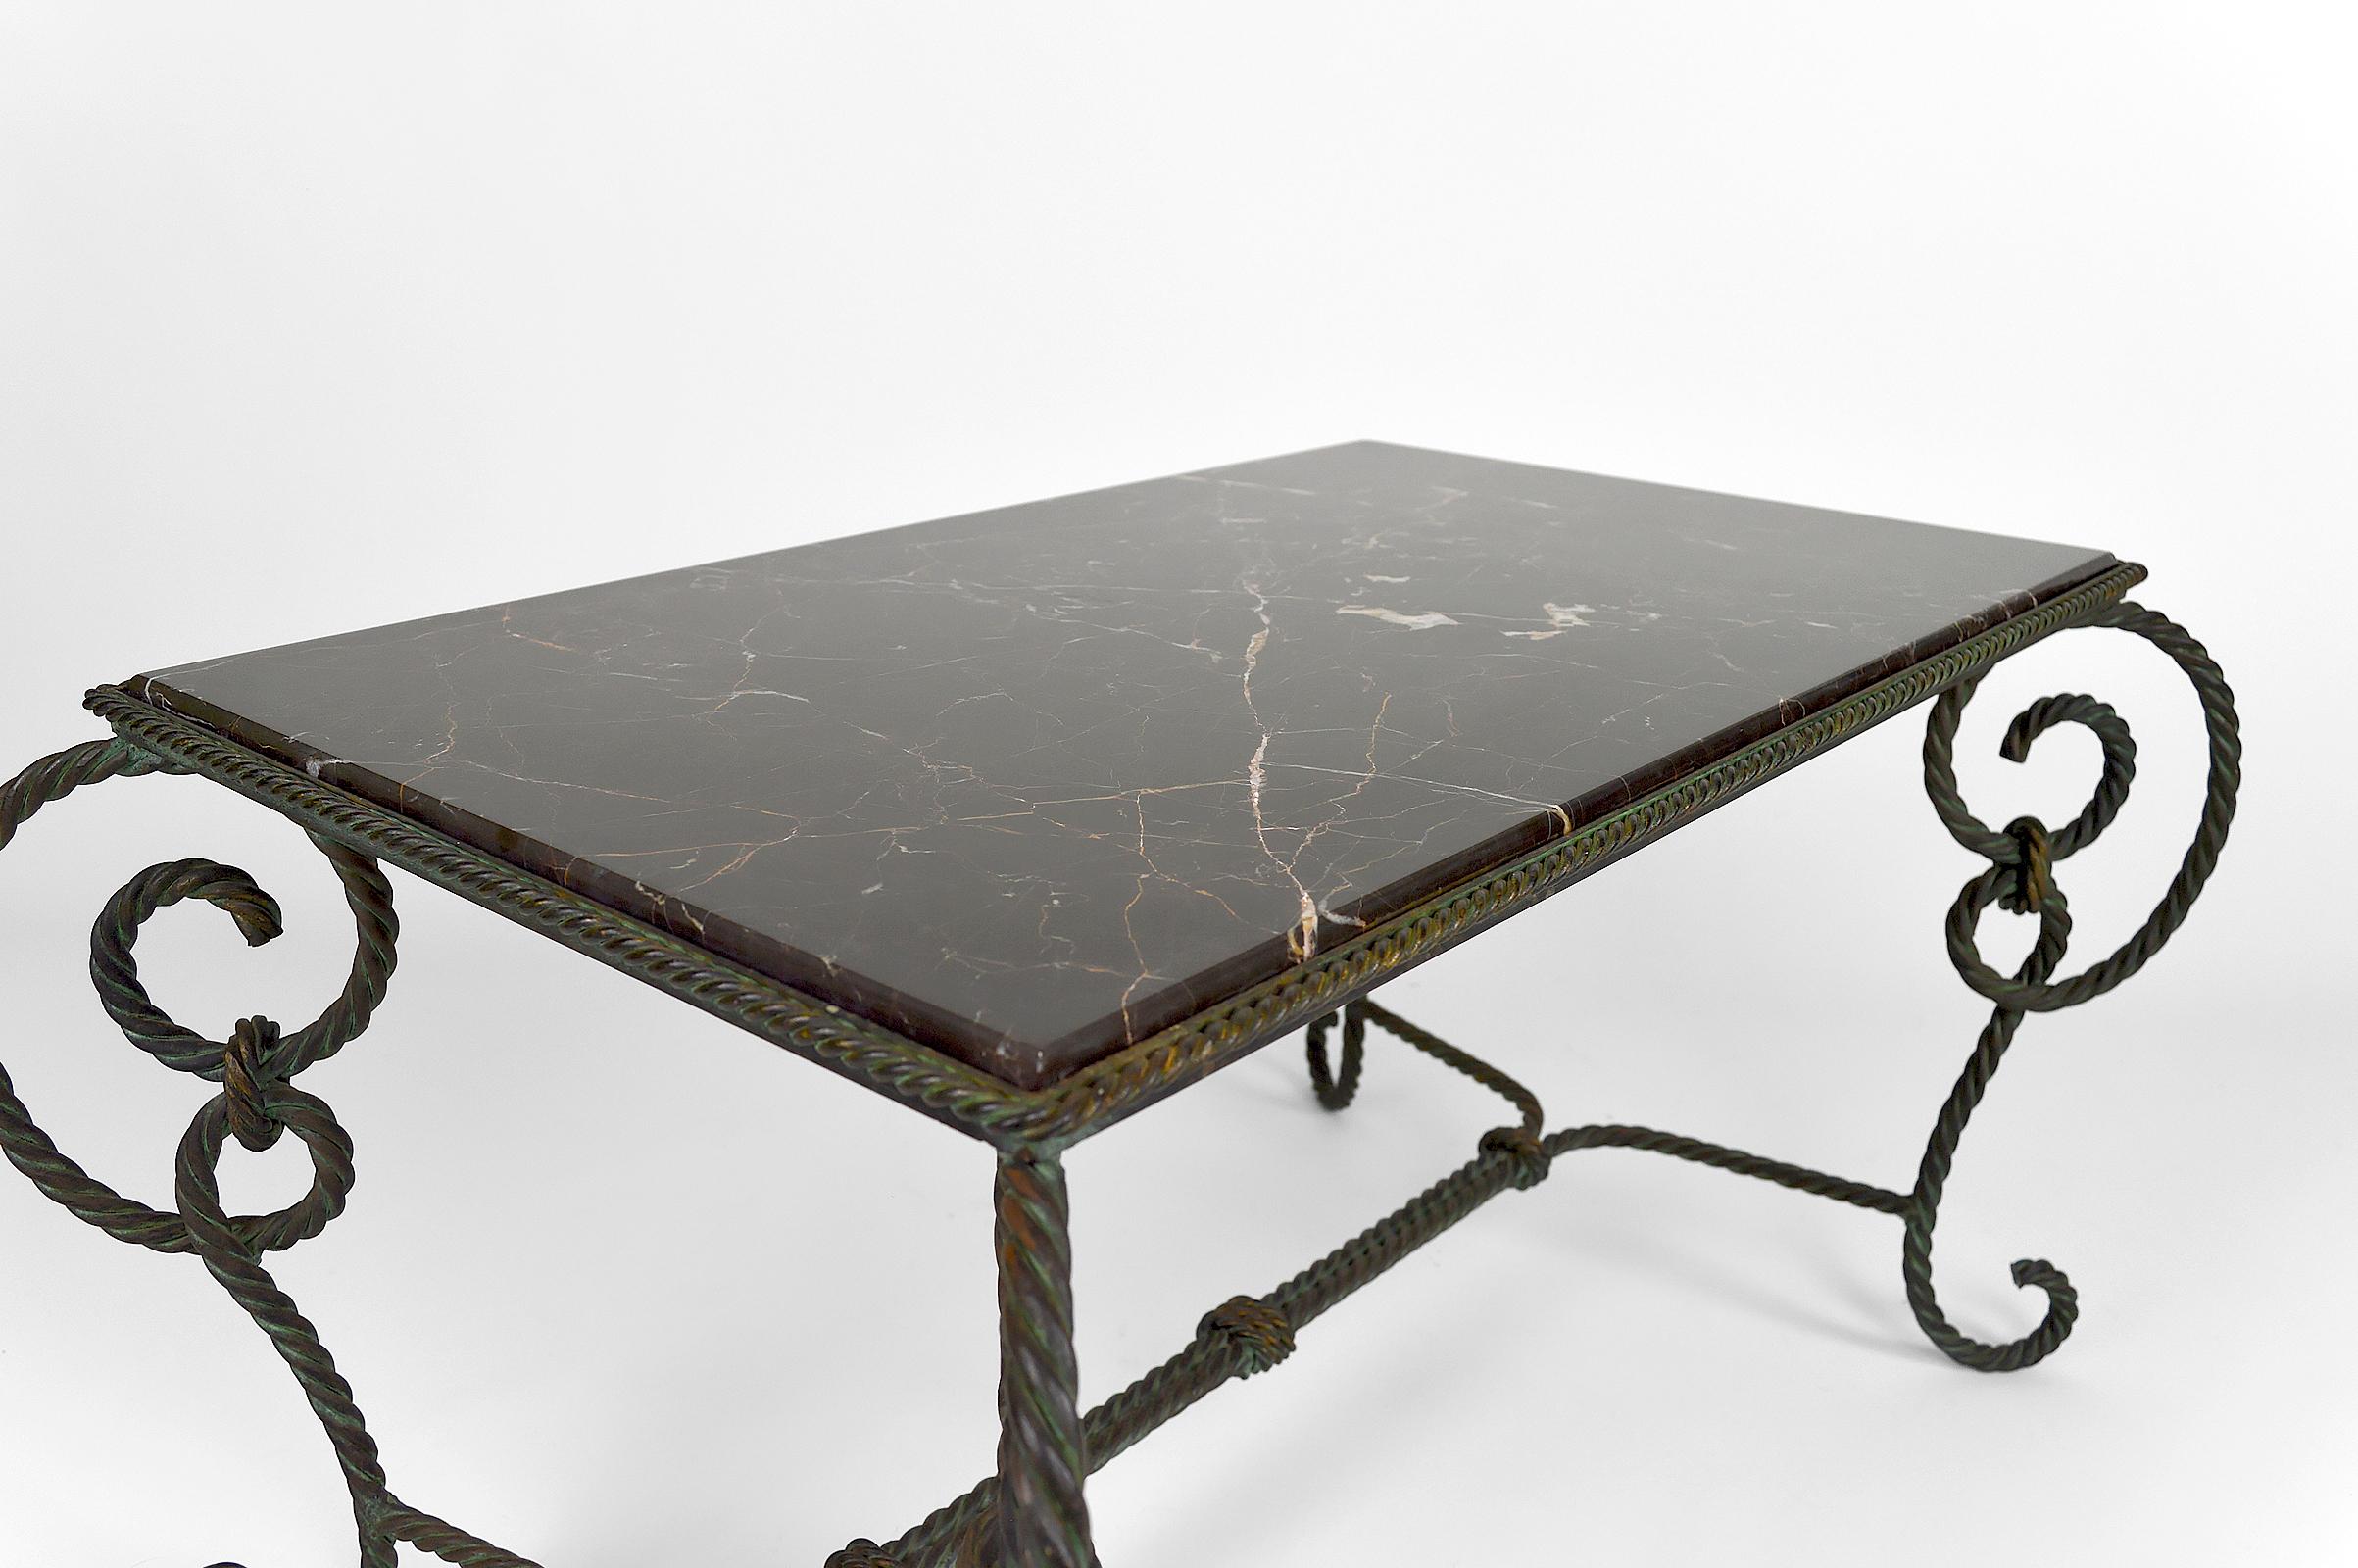 Rectangular Art Deco Coffee Table in Wrought Iron and Black Marble, France, 1940 For Sale 6